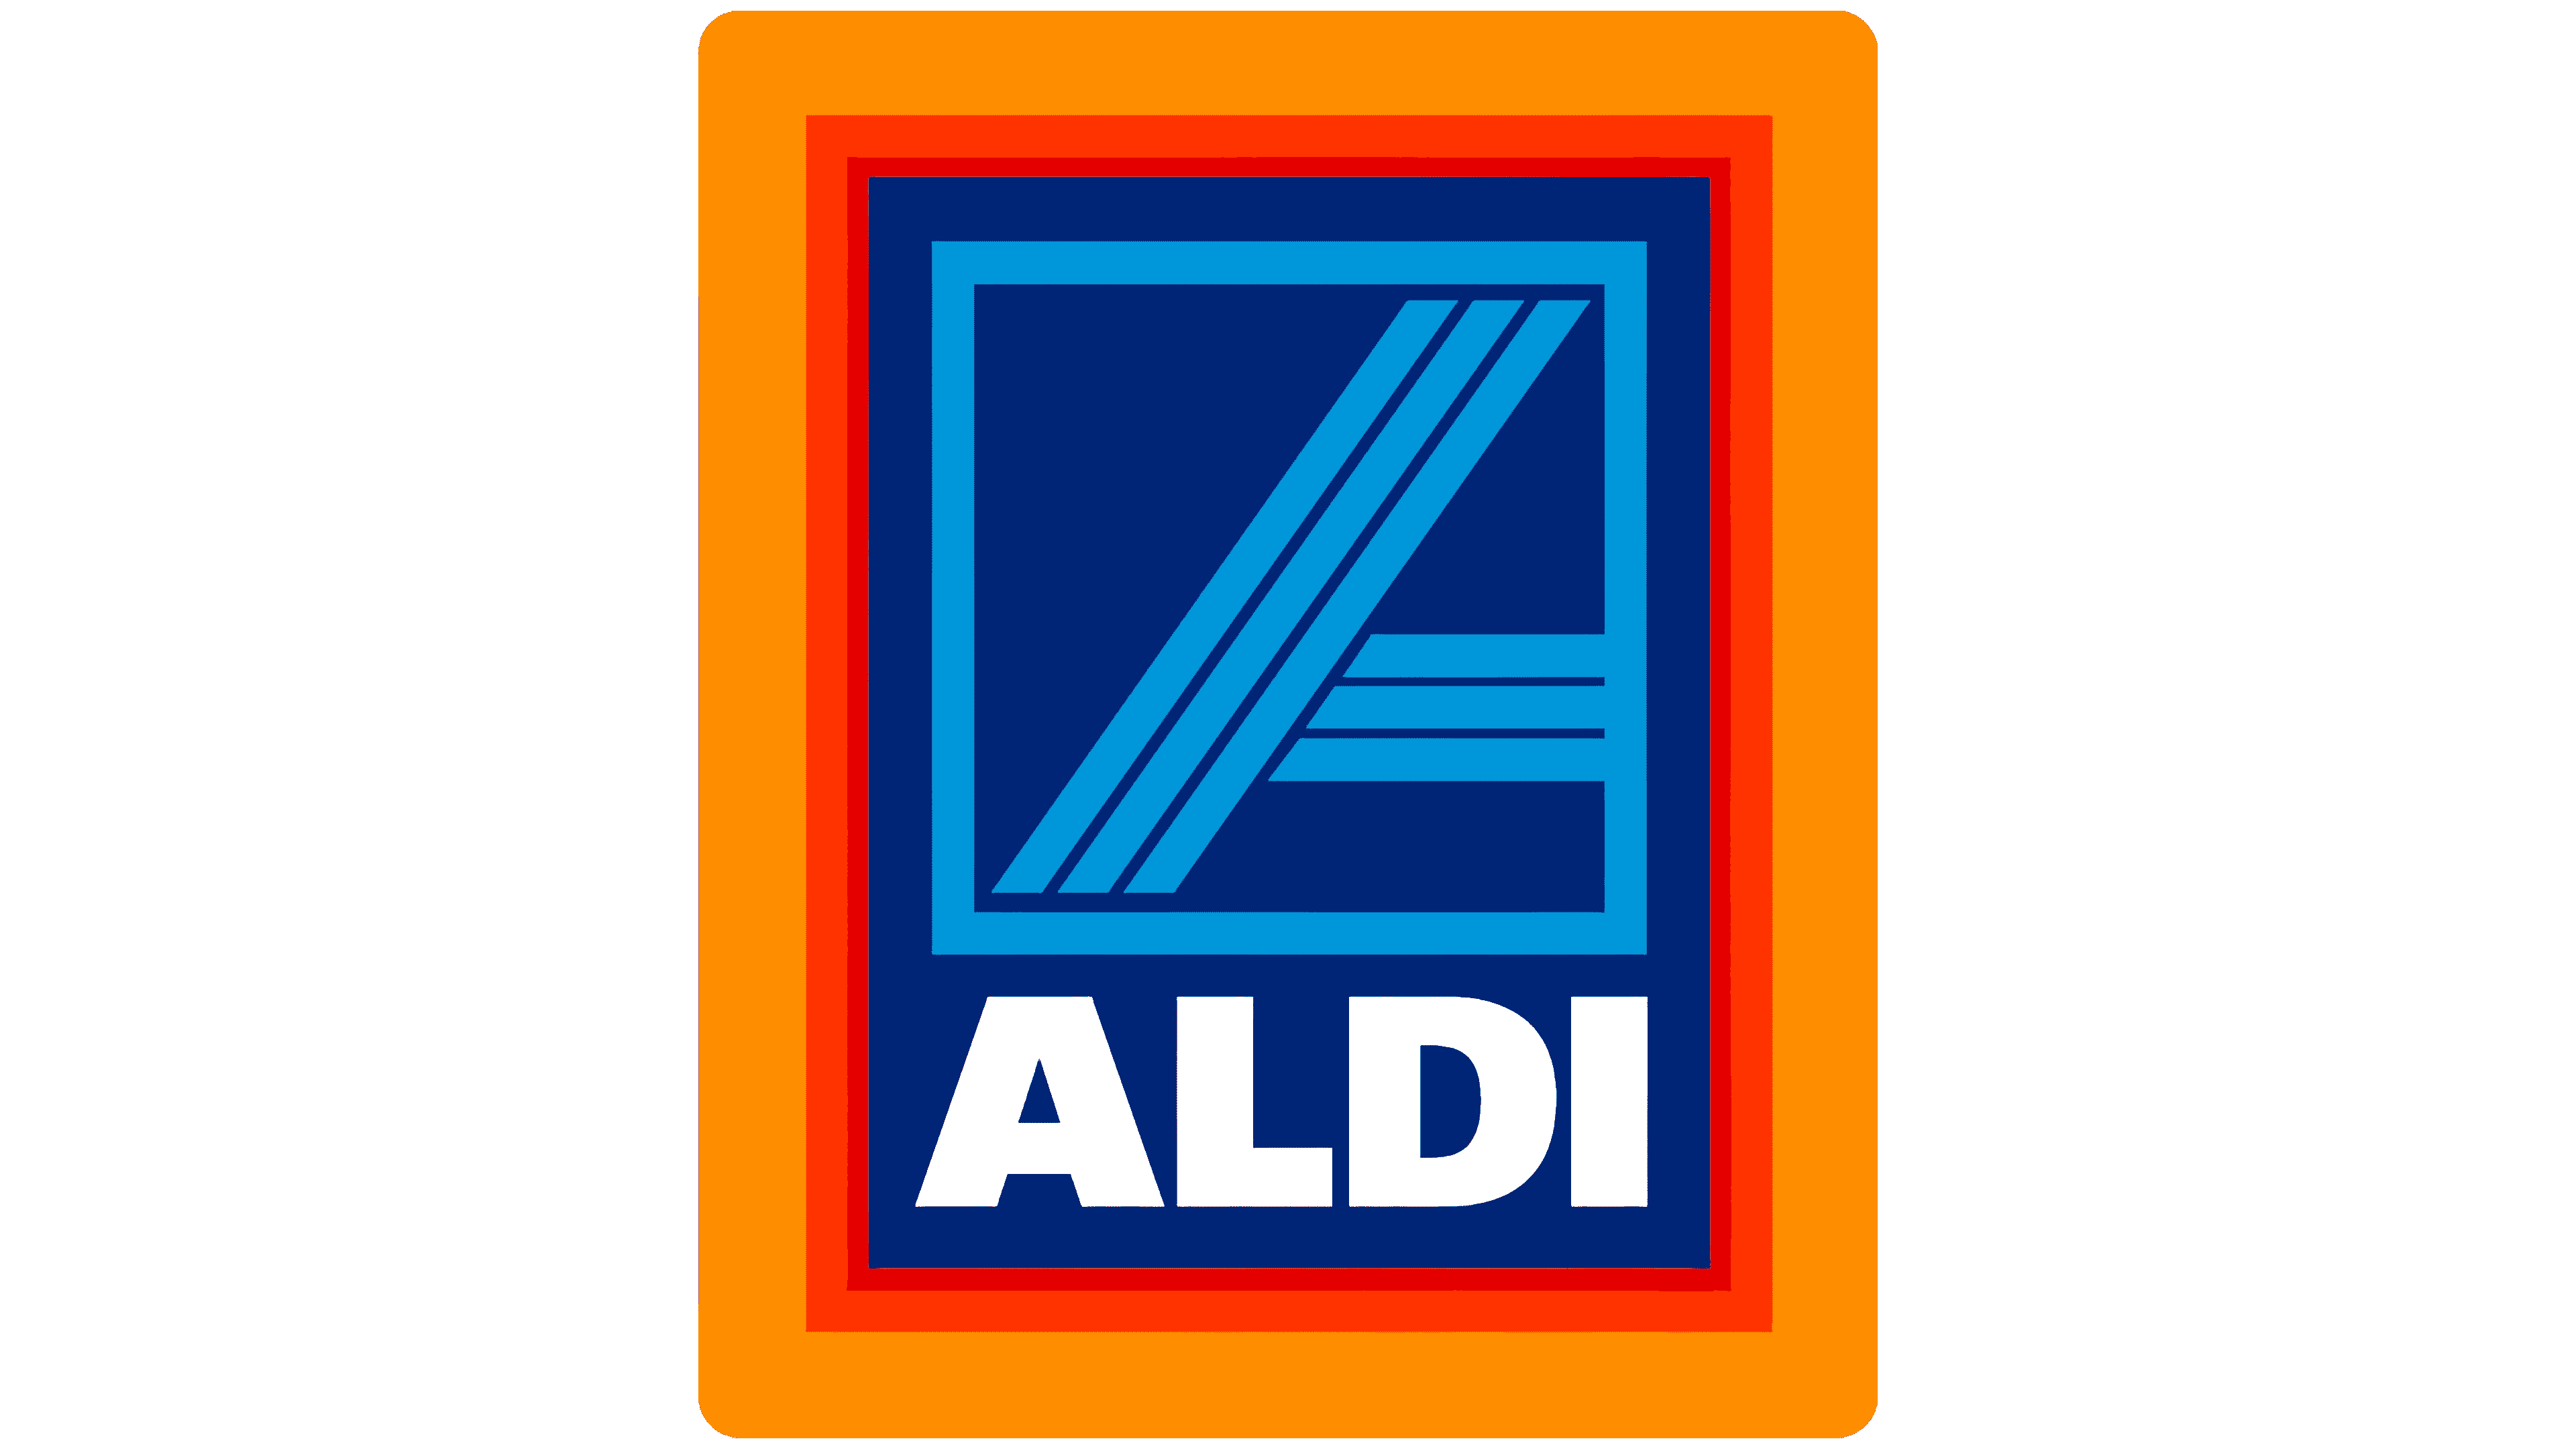 ALDI Earns EPA’s Store Certification and Re-Certification Excellence Awards 4th Year in a Row